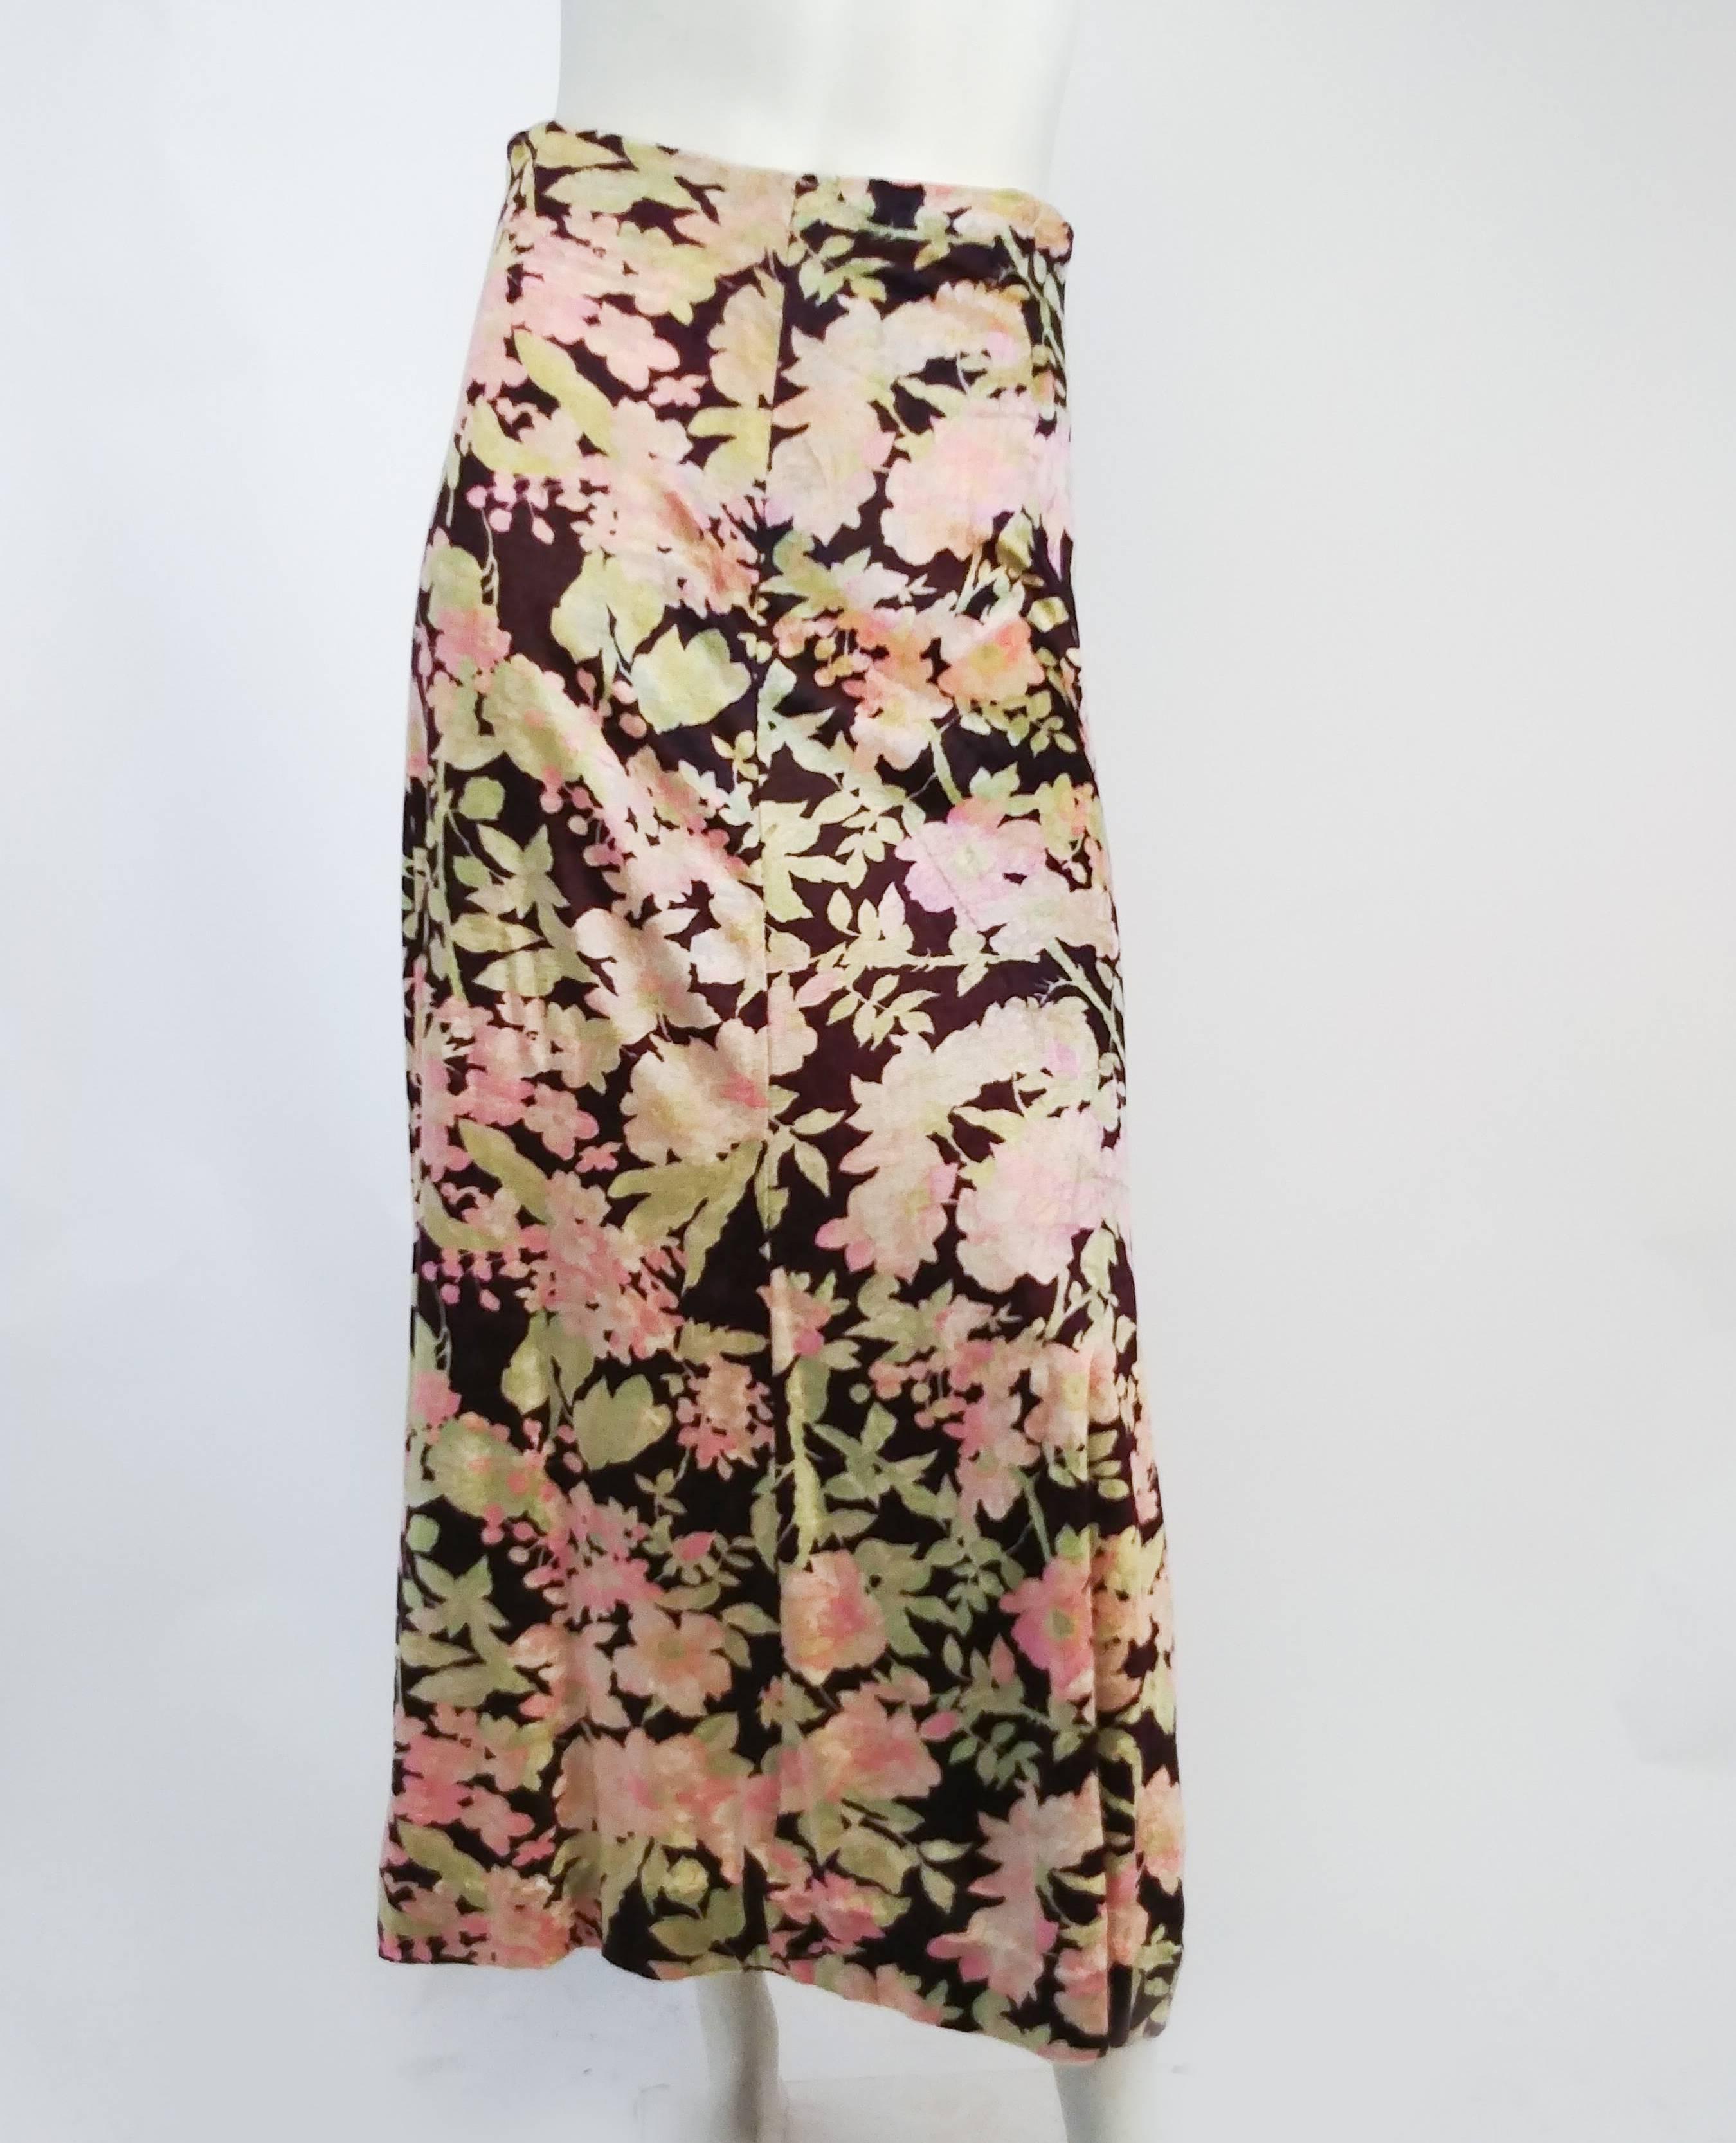 1970s Velour Flower Print Two Piece Top & Maxi Skirt Set. Stretch velvet two piece set in an iconic 1970s style. Maxi skirt zips up at back. Top can be worn on its own or unbuttoned as a jacket, slightly cropped and with a ruffled hem. 